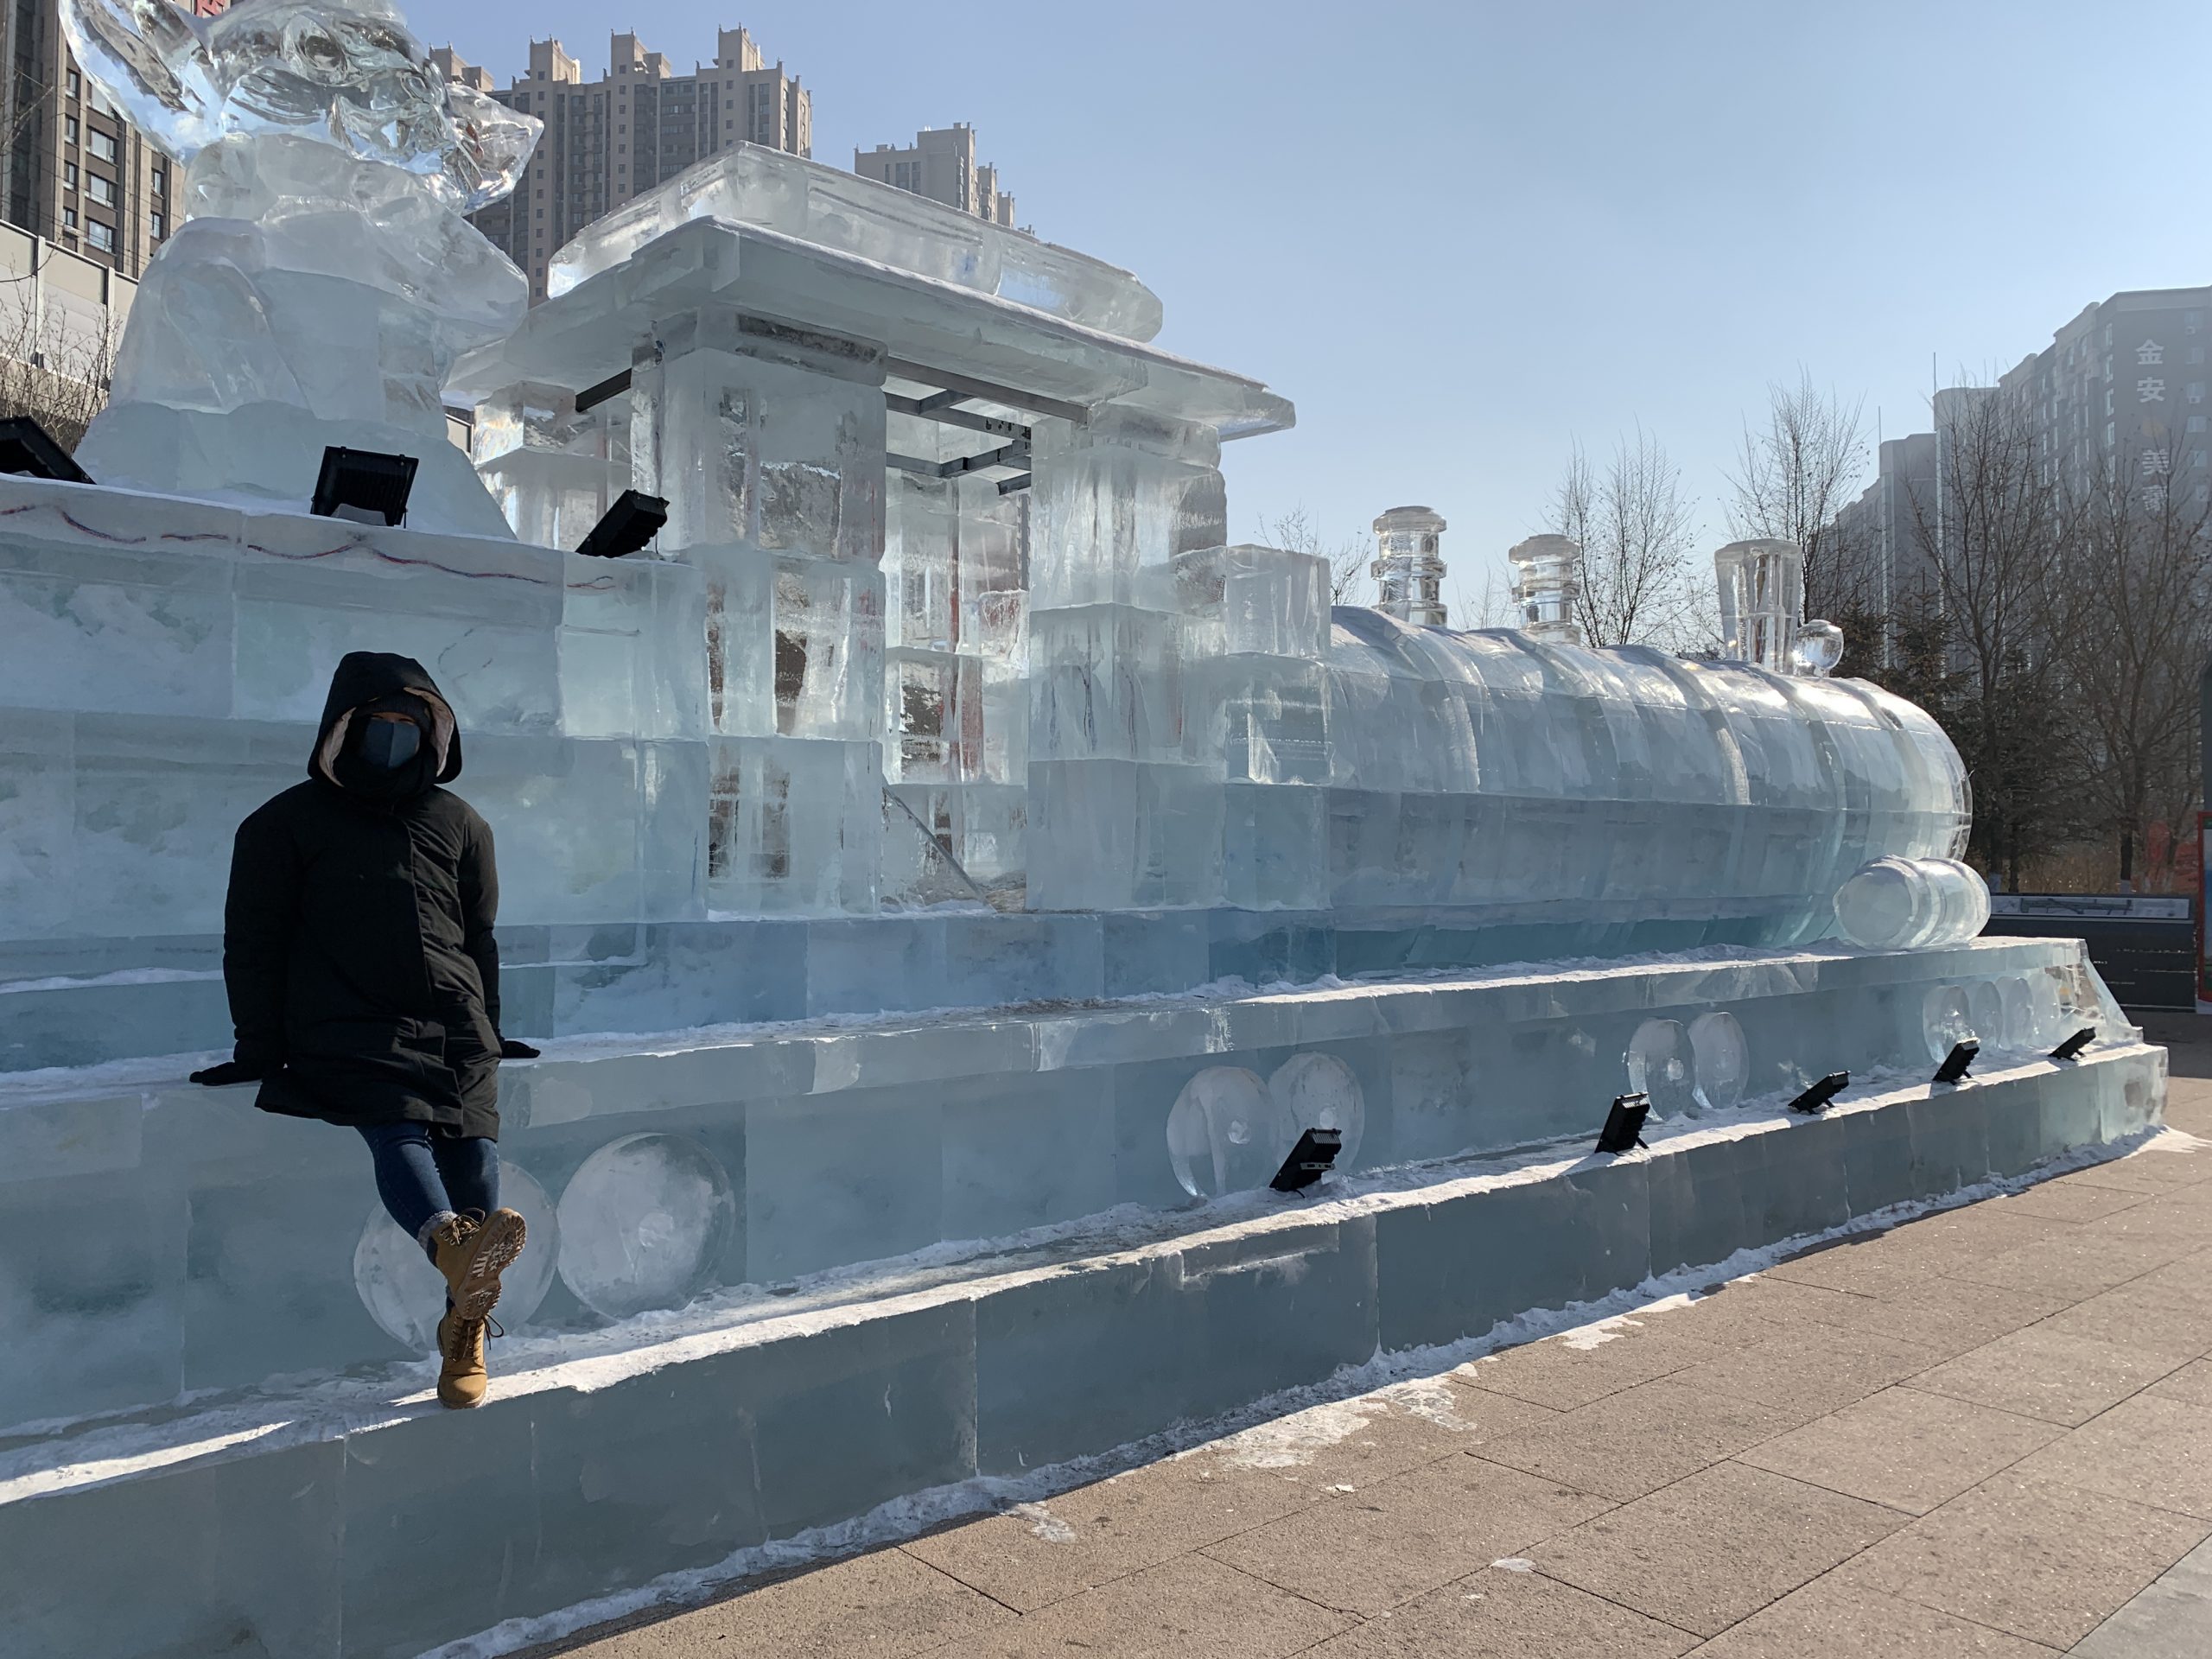 Ice sculpture of a train